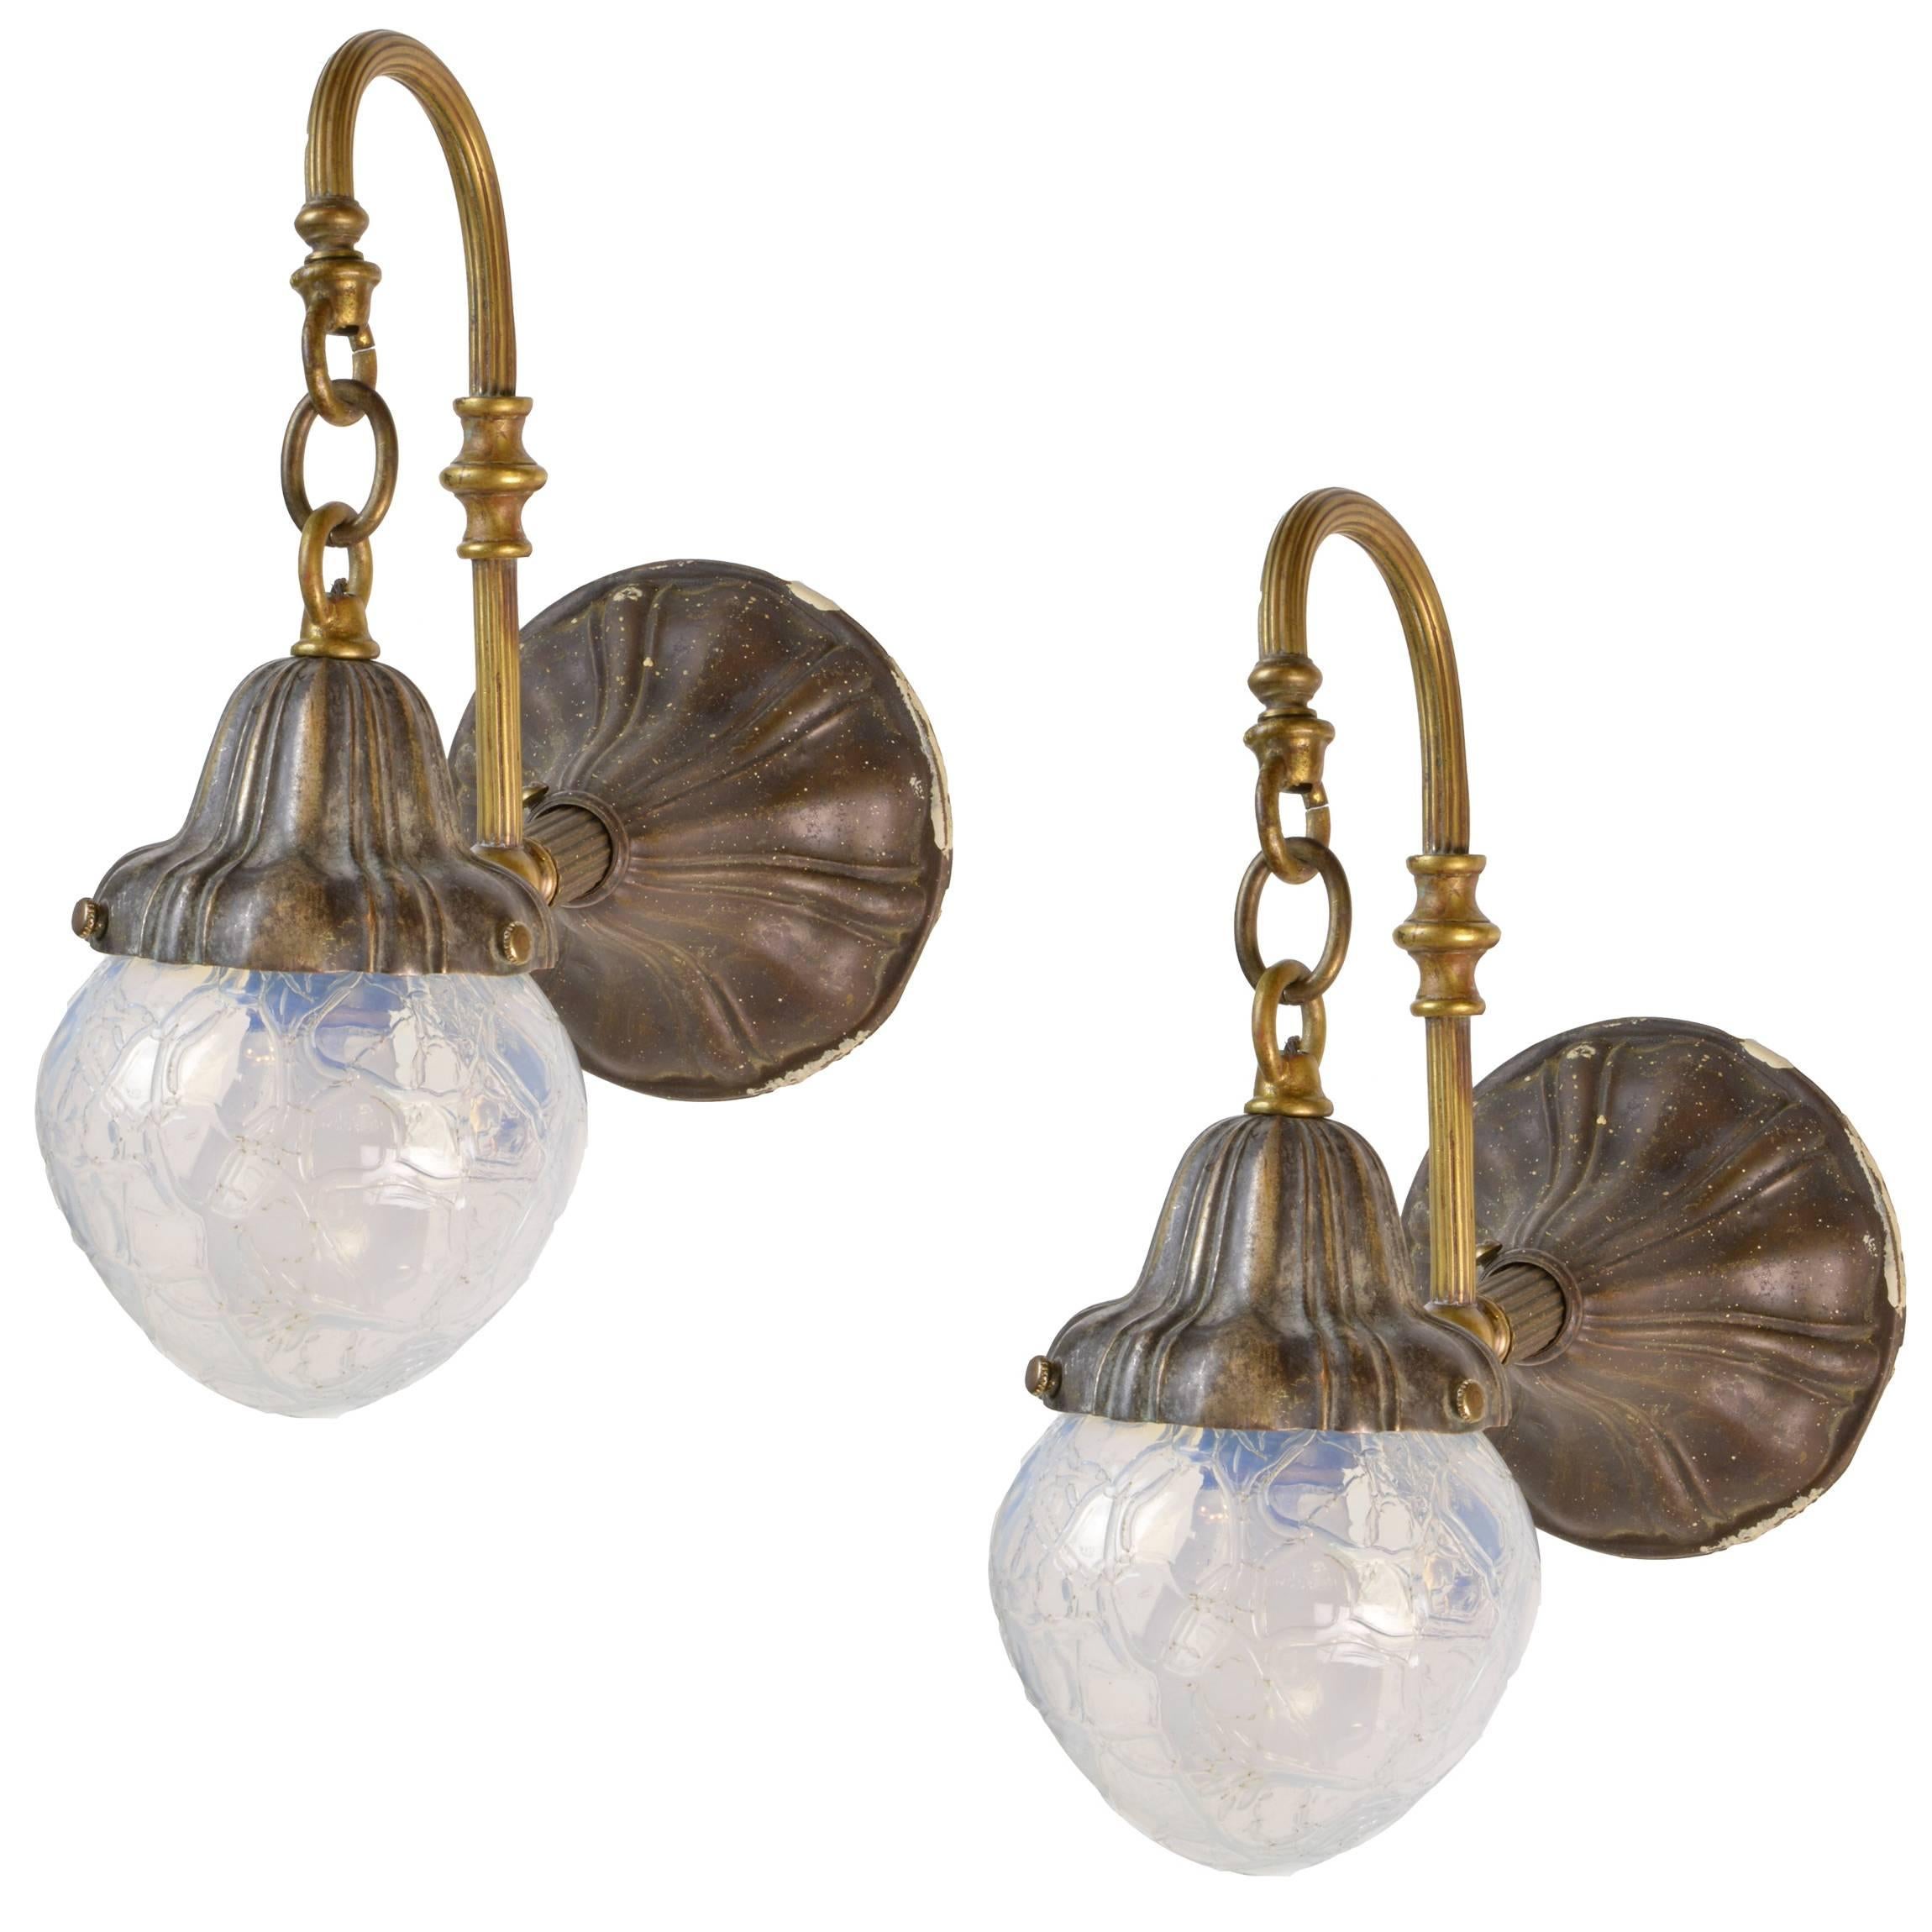 Pair of Early American Art Nouveau Sconces with Crackled Vaseline Glass Shades